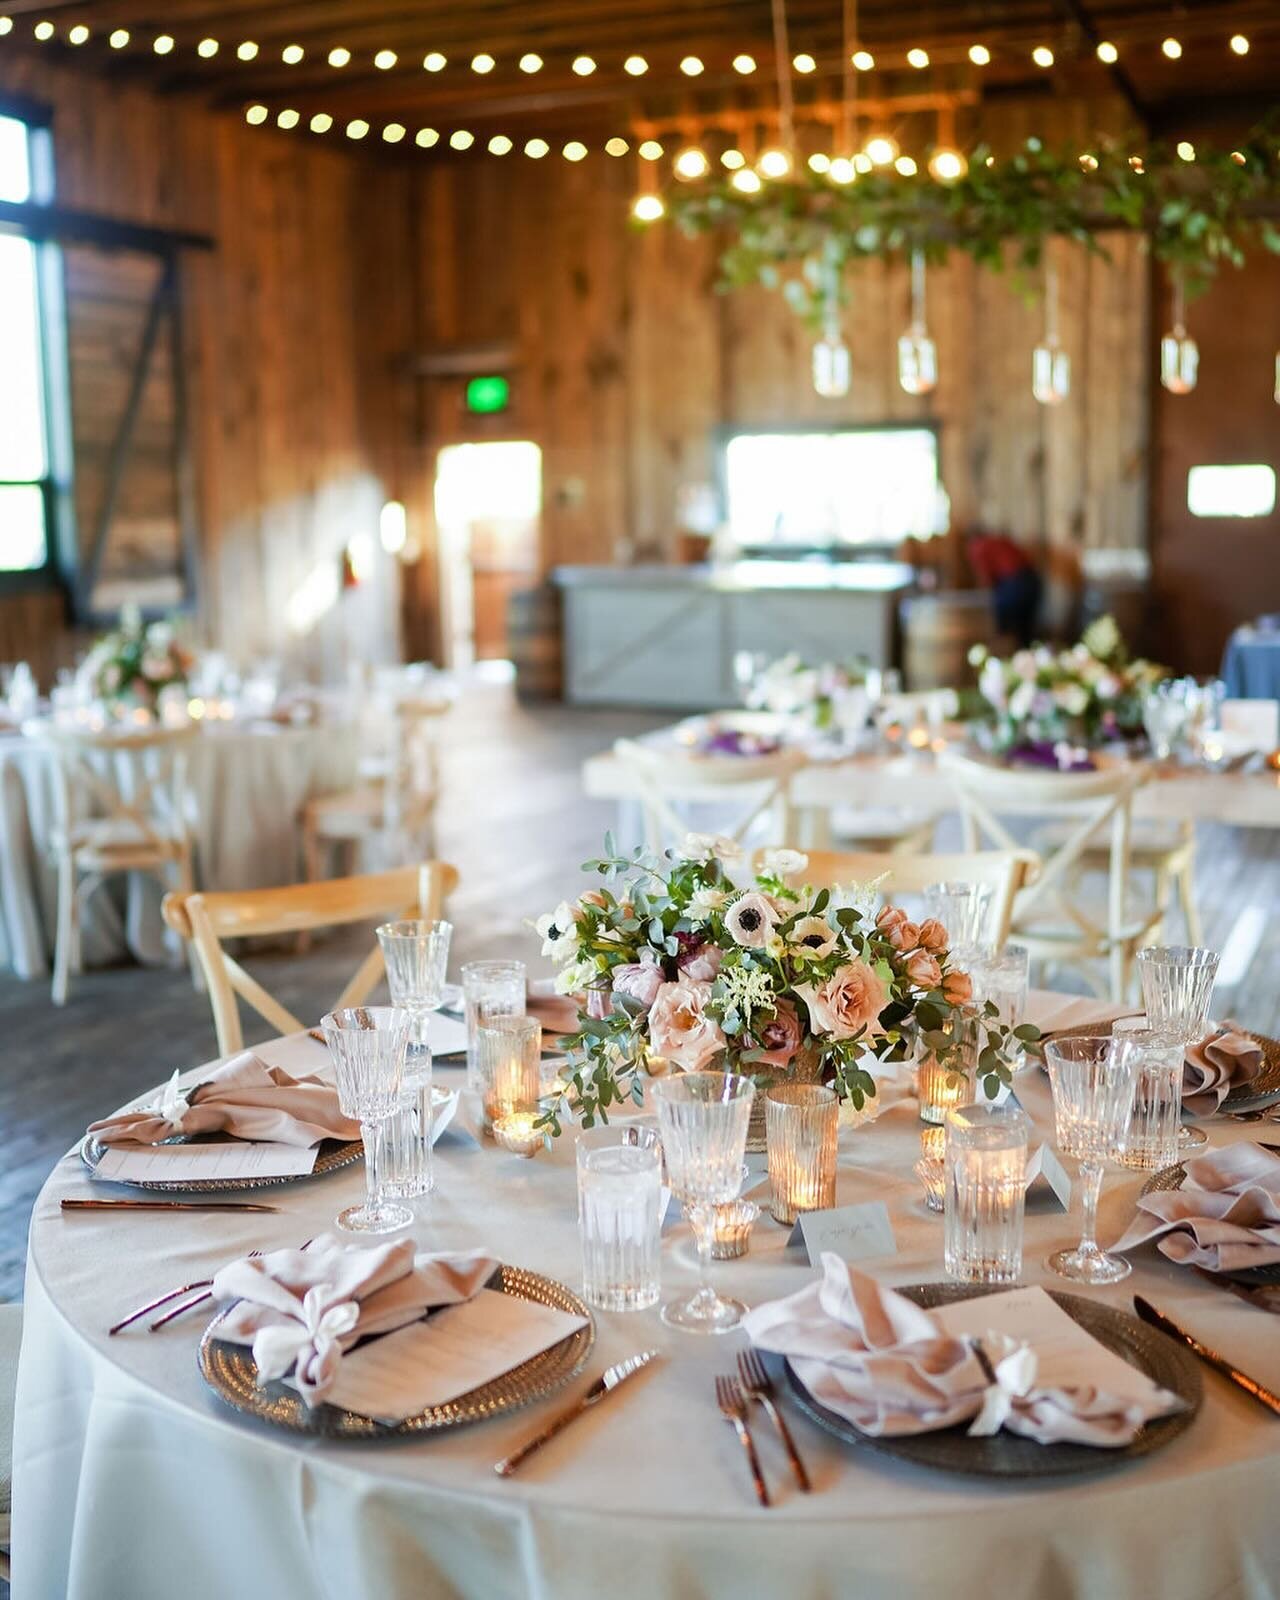 Soft and sweet colors with romantic lighting for this ranch wedding! #duetweddingsandevents

#blueskyranch #utahweddingplanner #ranchwedding #utahweddings #weddingdetails #weddinginspo